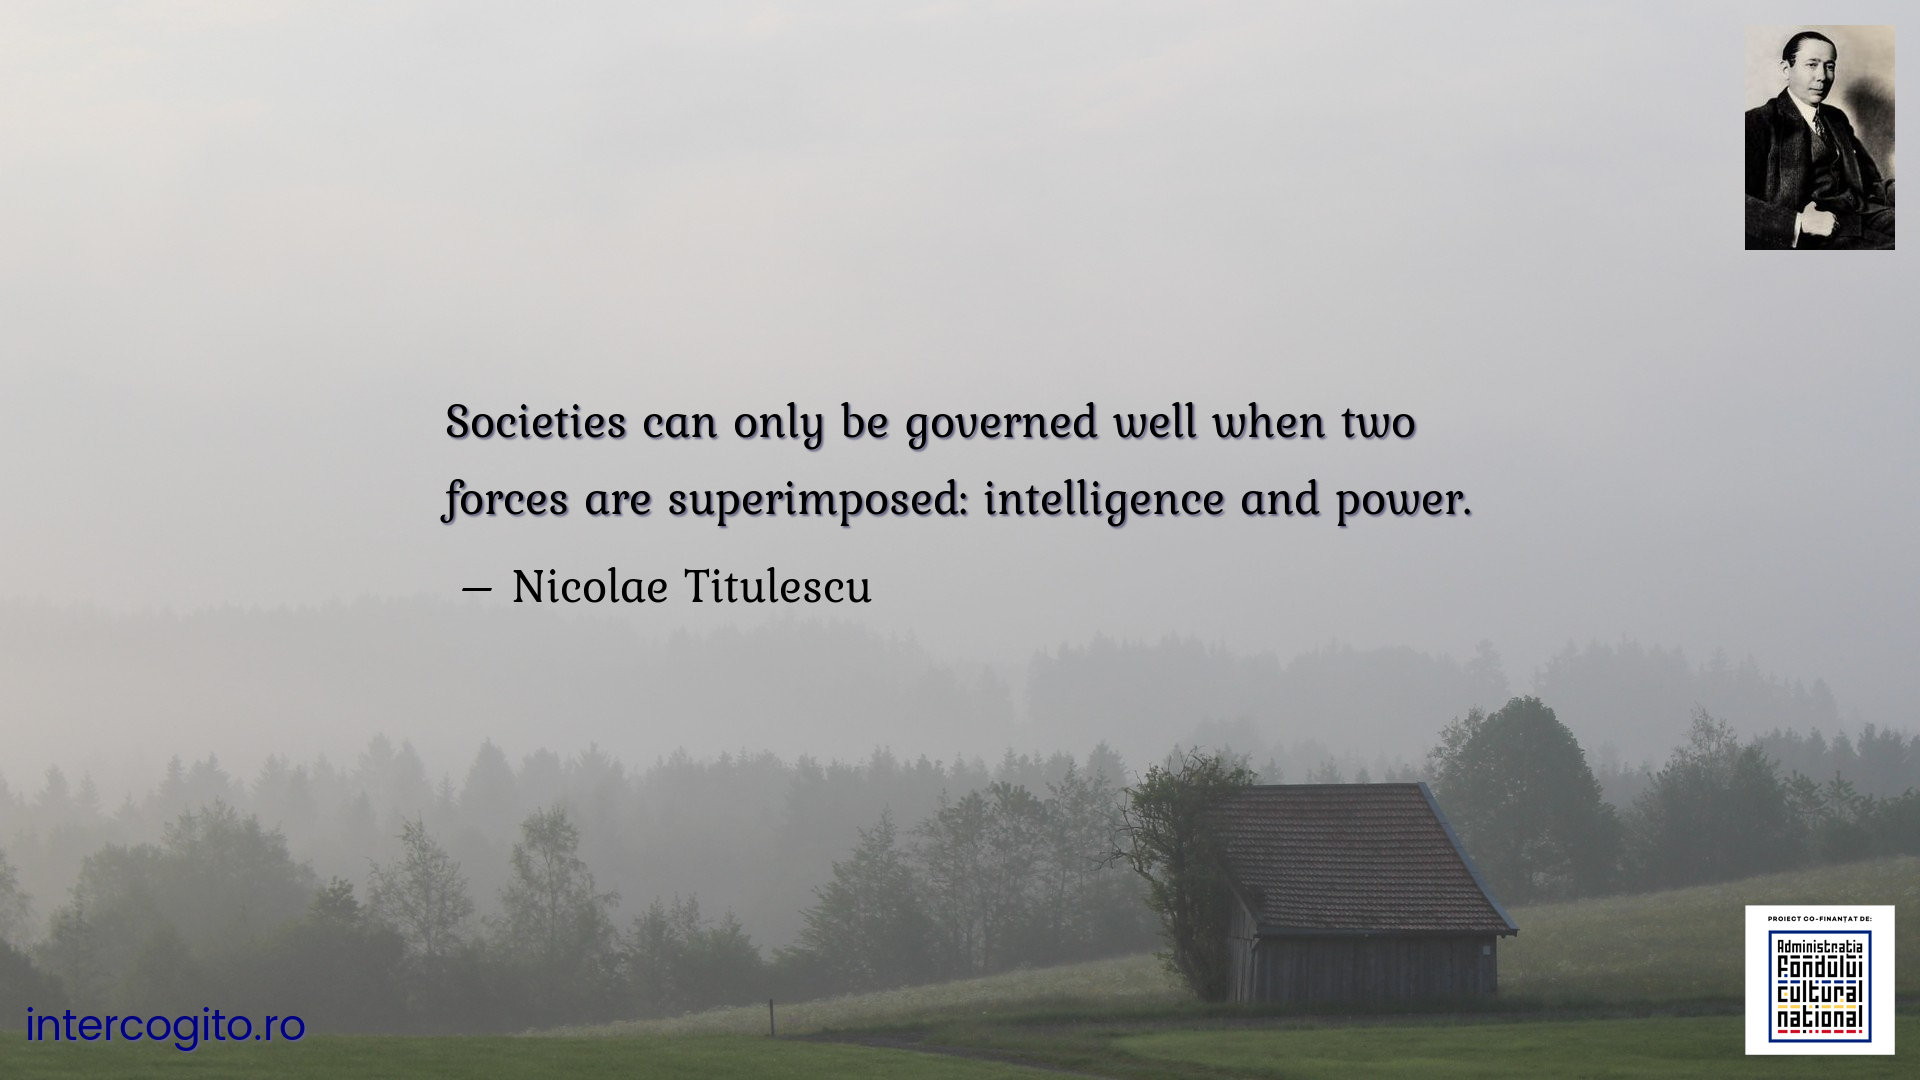 Societies can only be governed well when two forces are superimposed: intelligence and power.